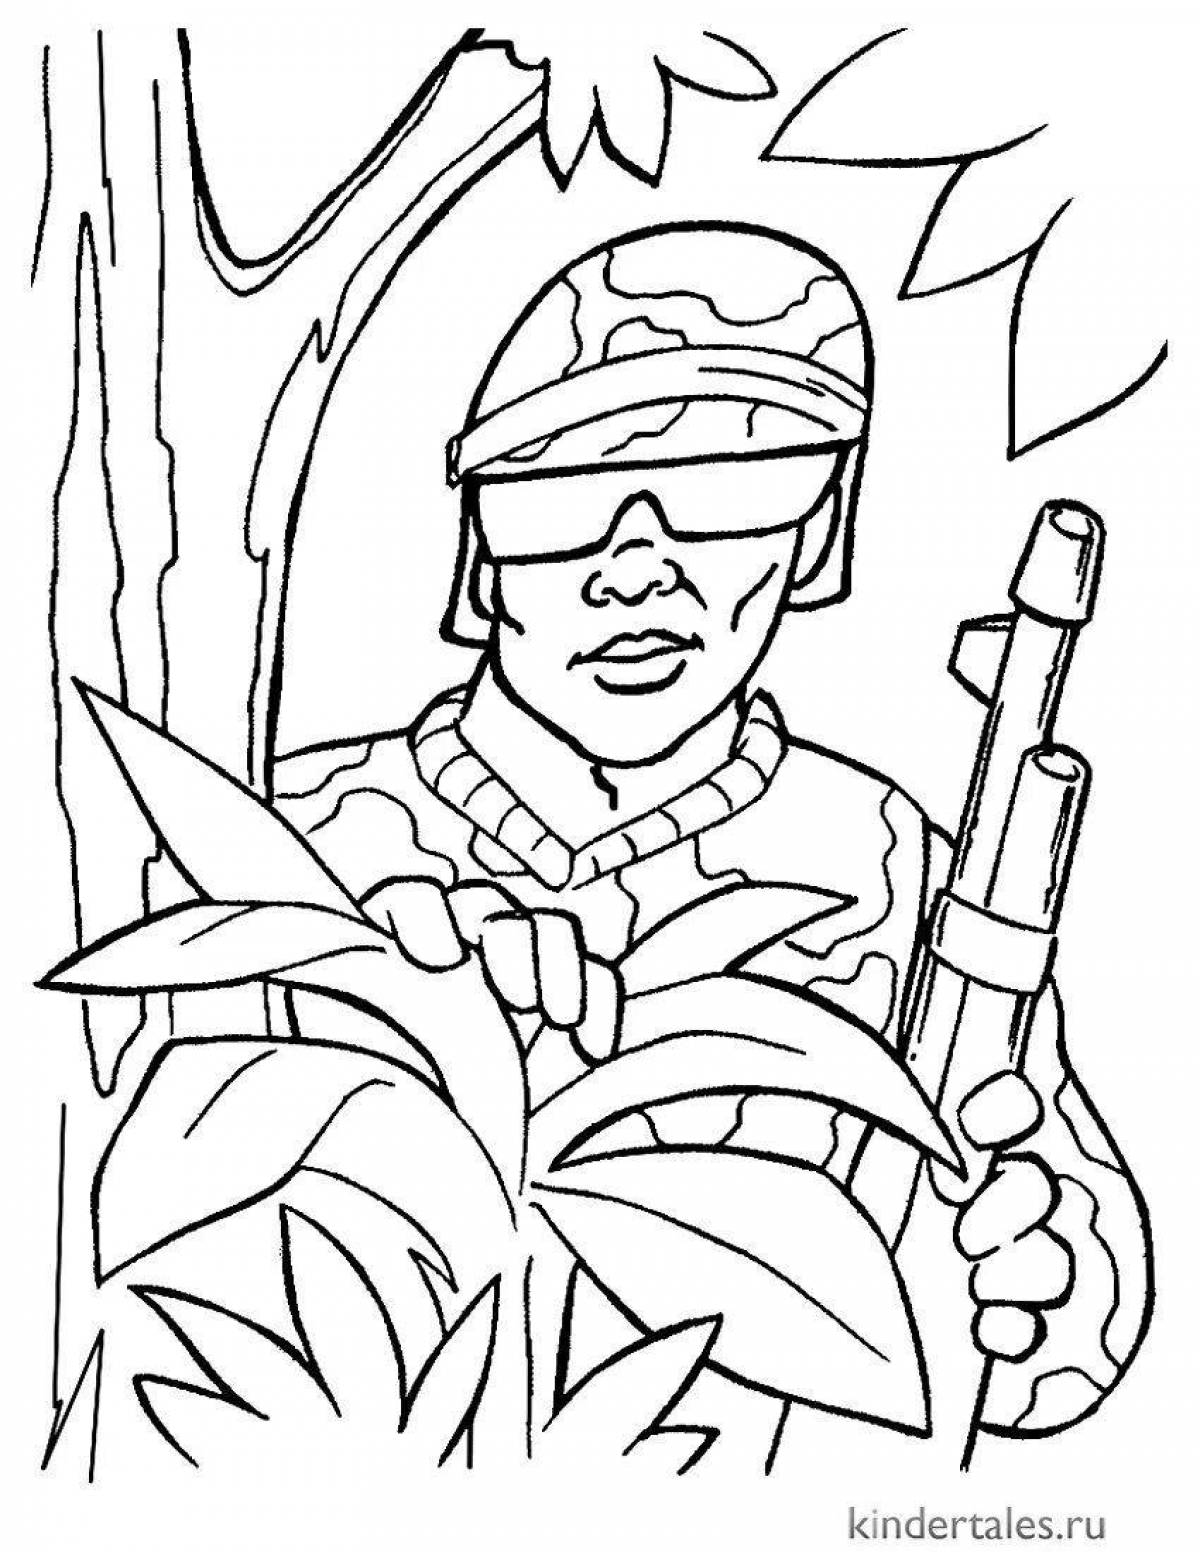 Dynamic military drawing for kids